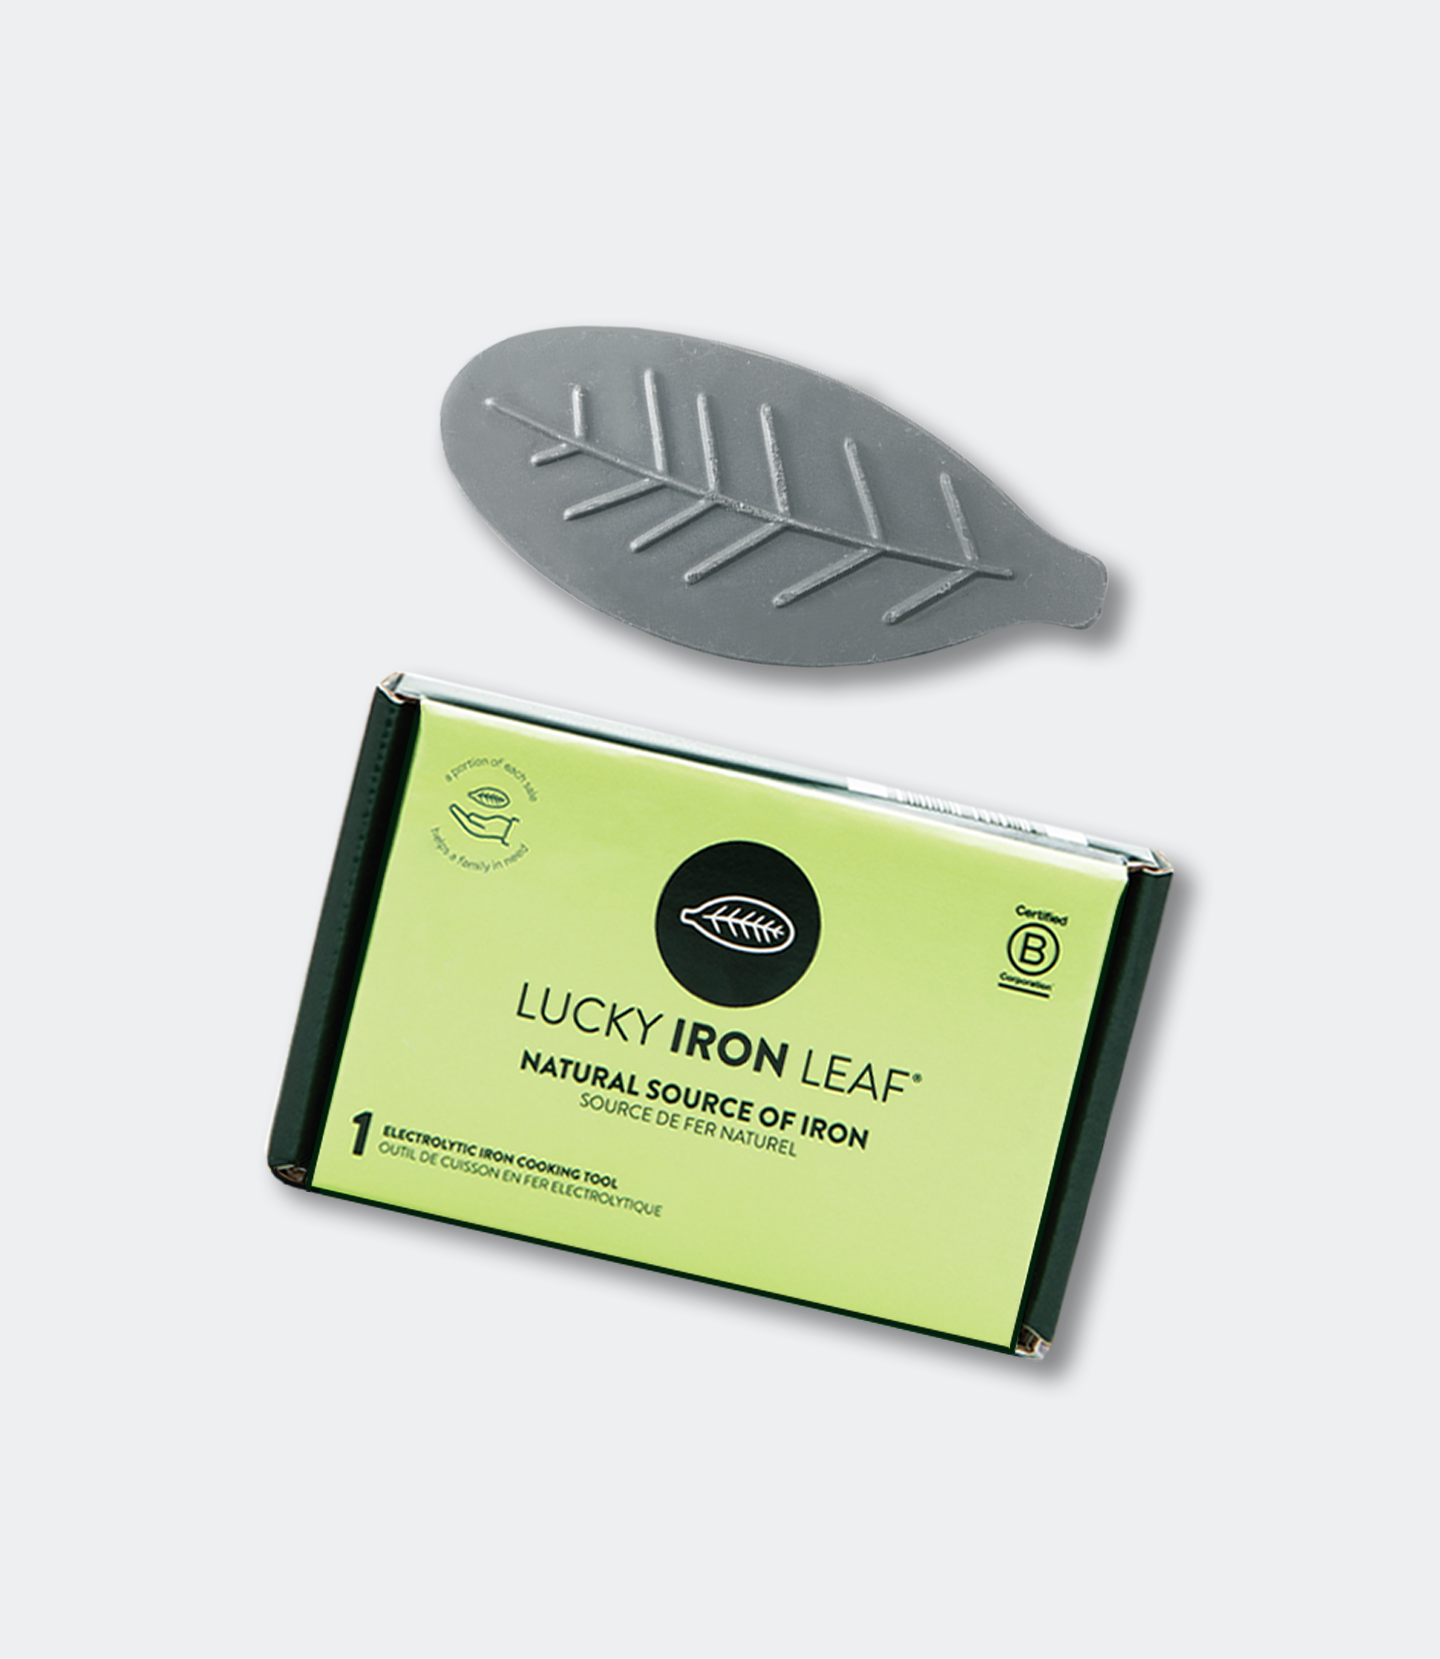 https://cdn.shopify.com/s/files/1/2007/5905/files/Lucky-Iron-Leaf-with-box-desktop.png?v=1696458993